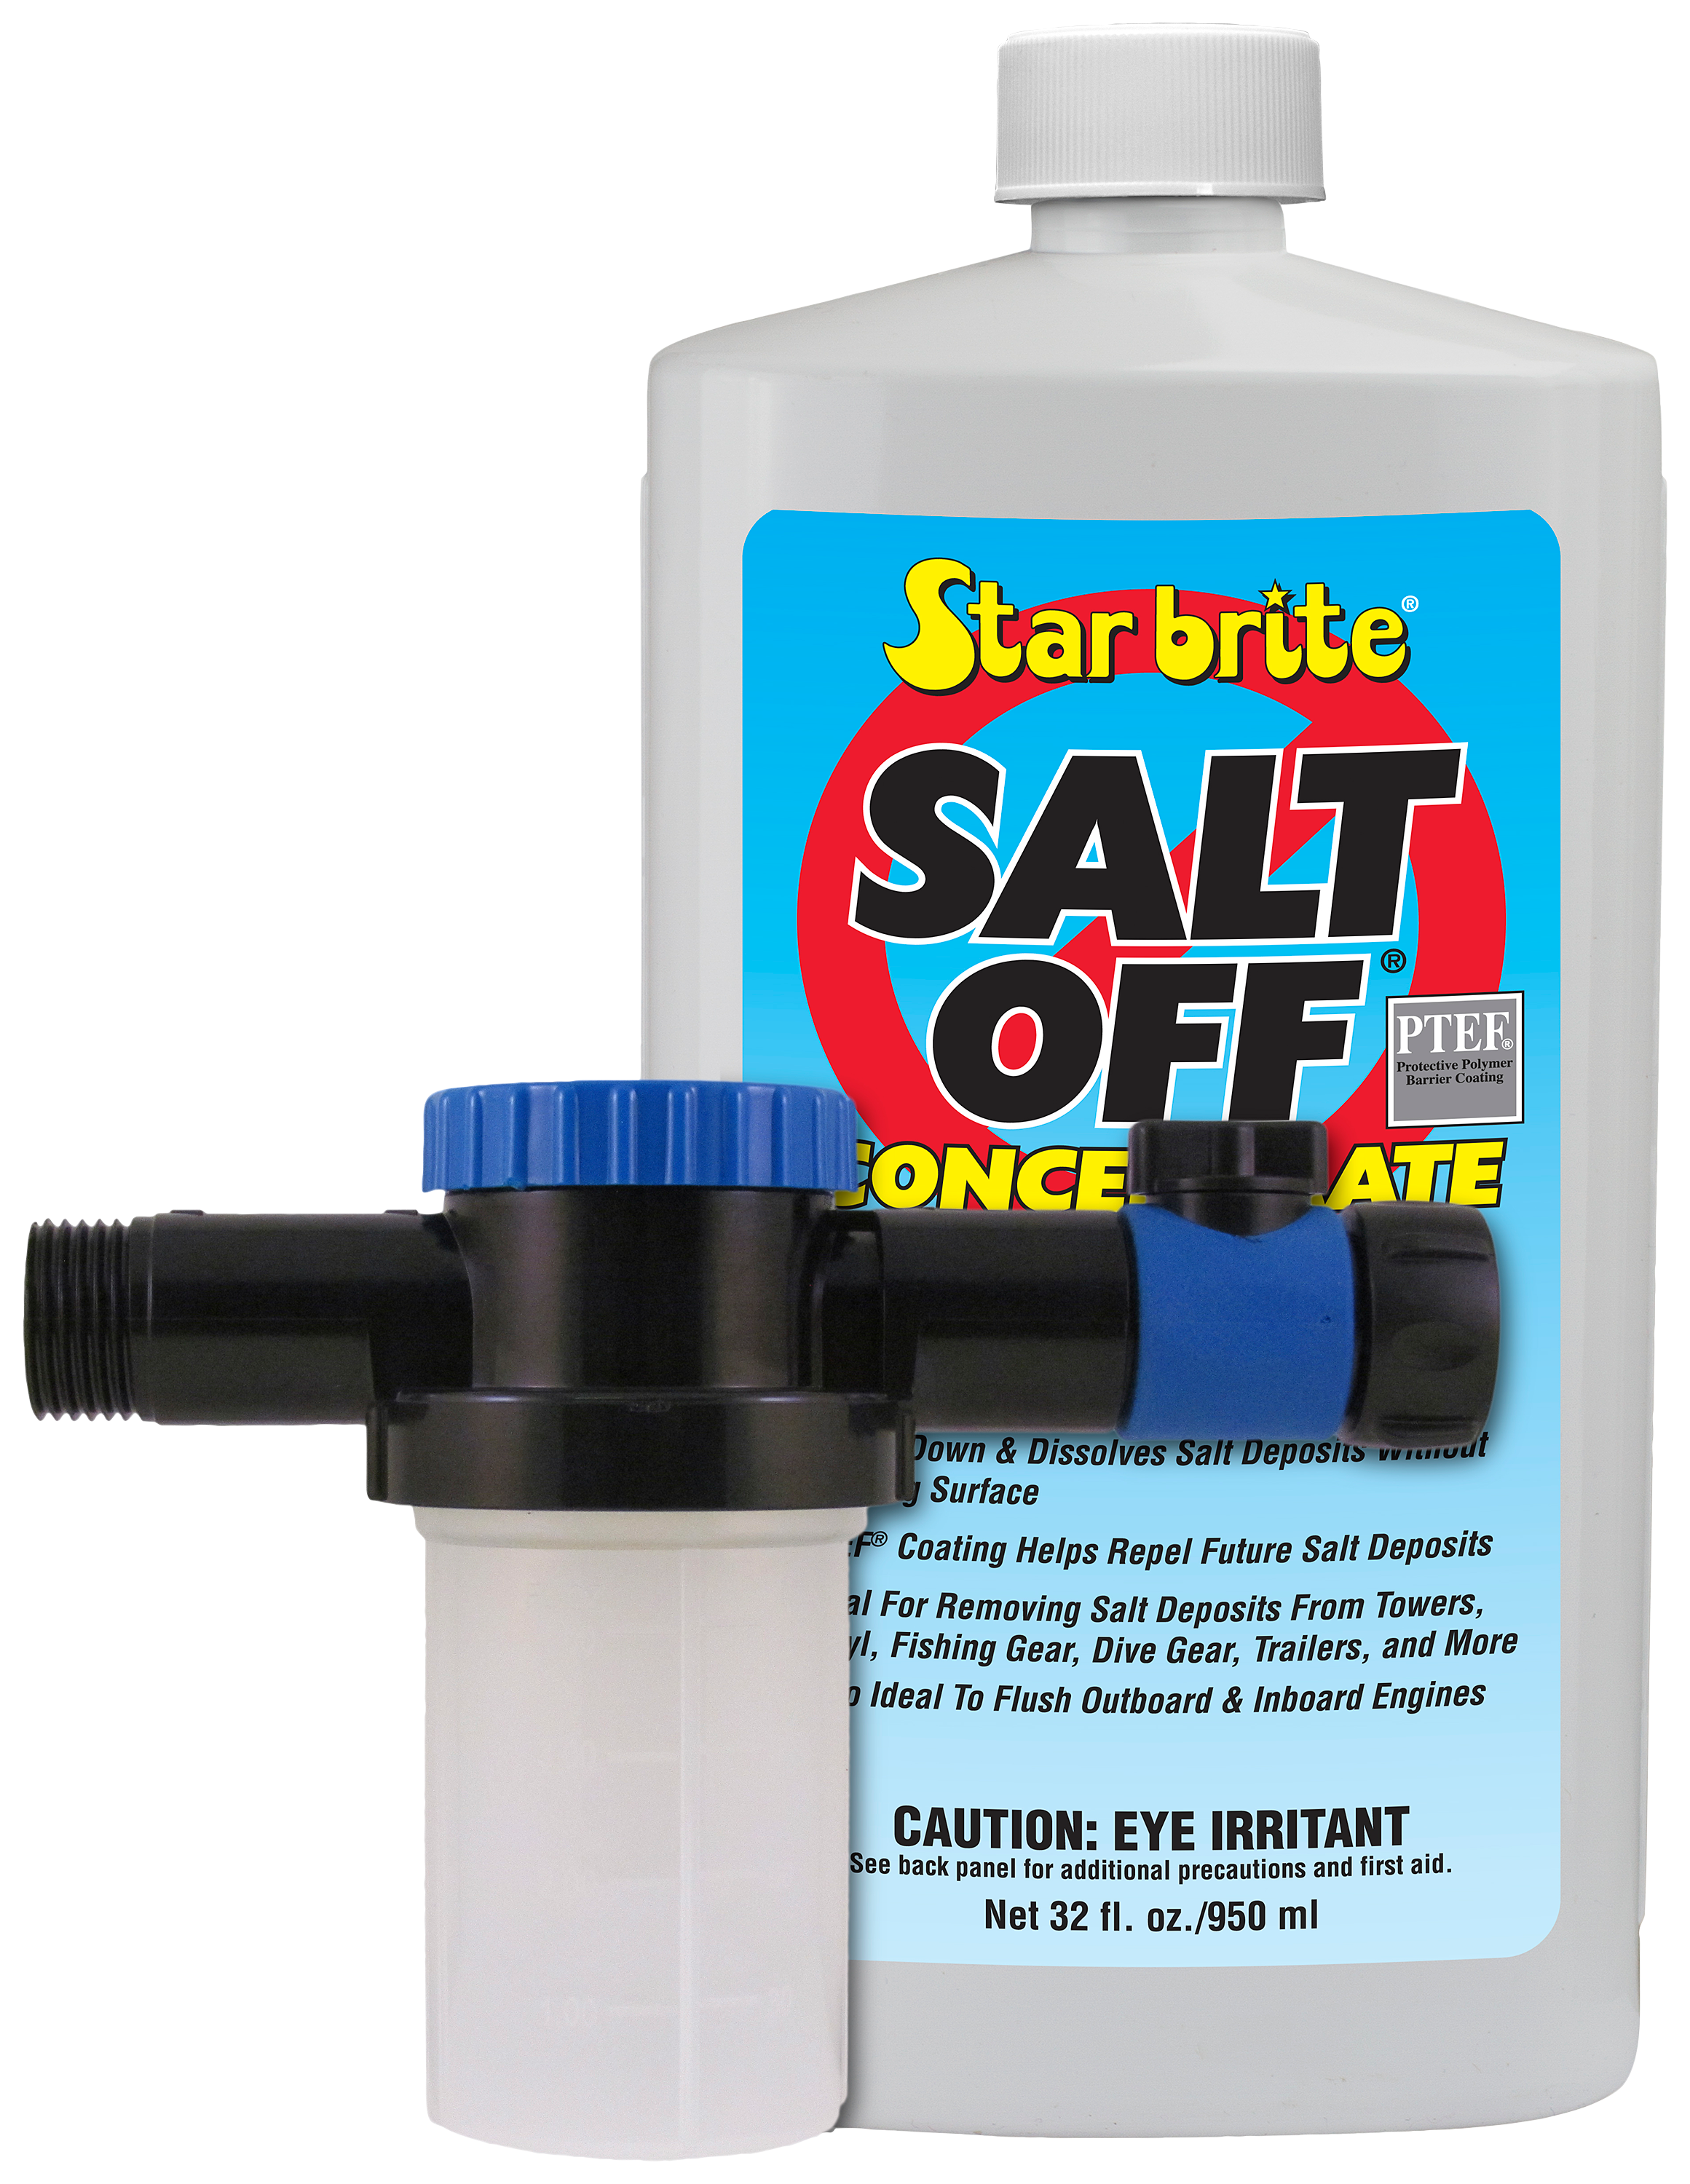 Does SALTY CAPTAIN, SALT AWAY, STARBRITE actually WORK??? We try